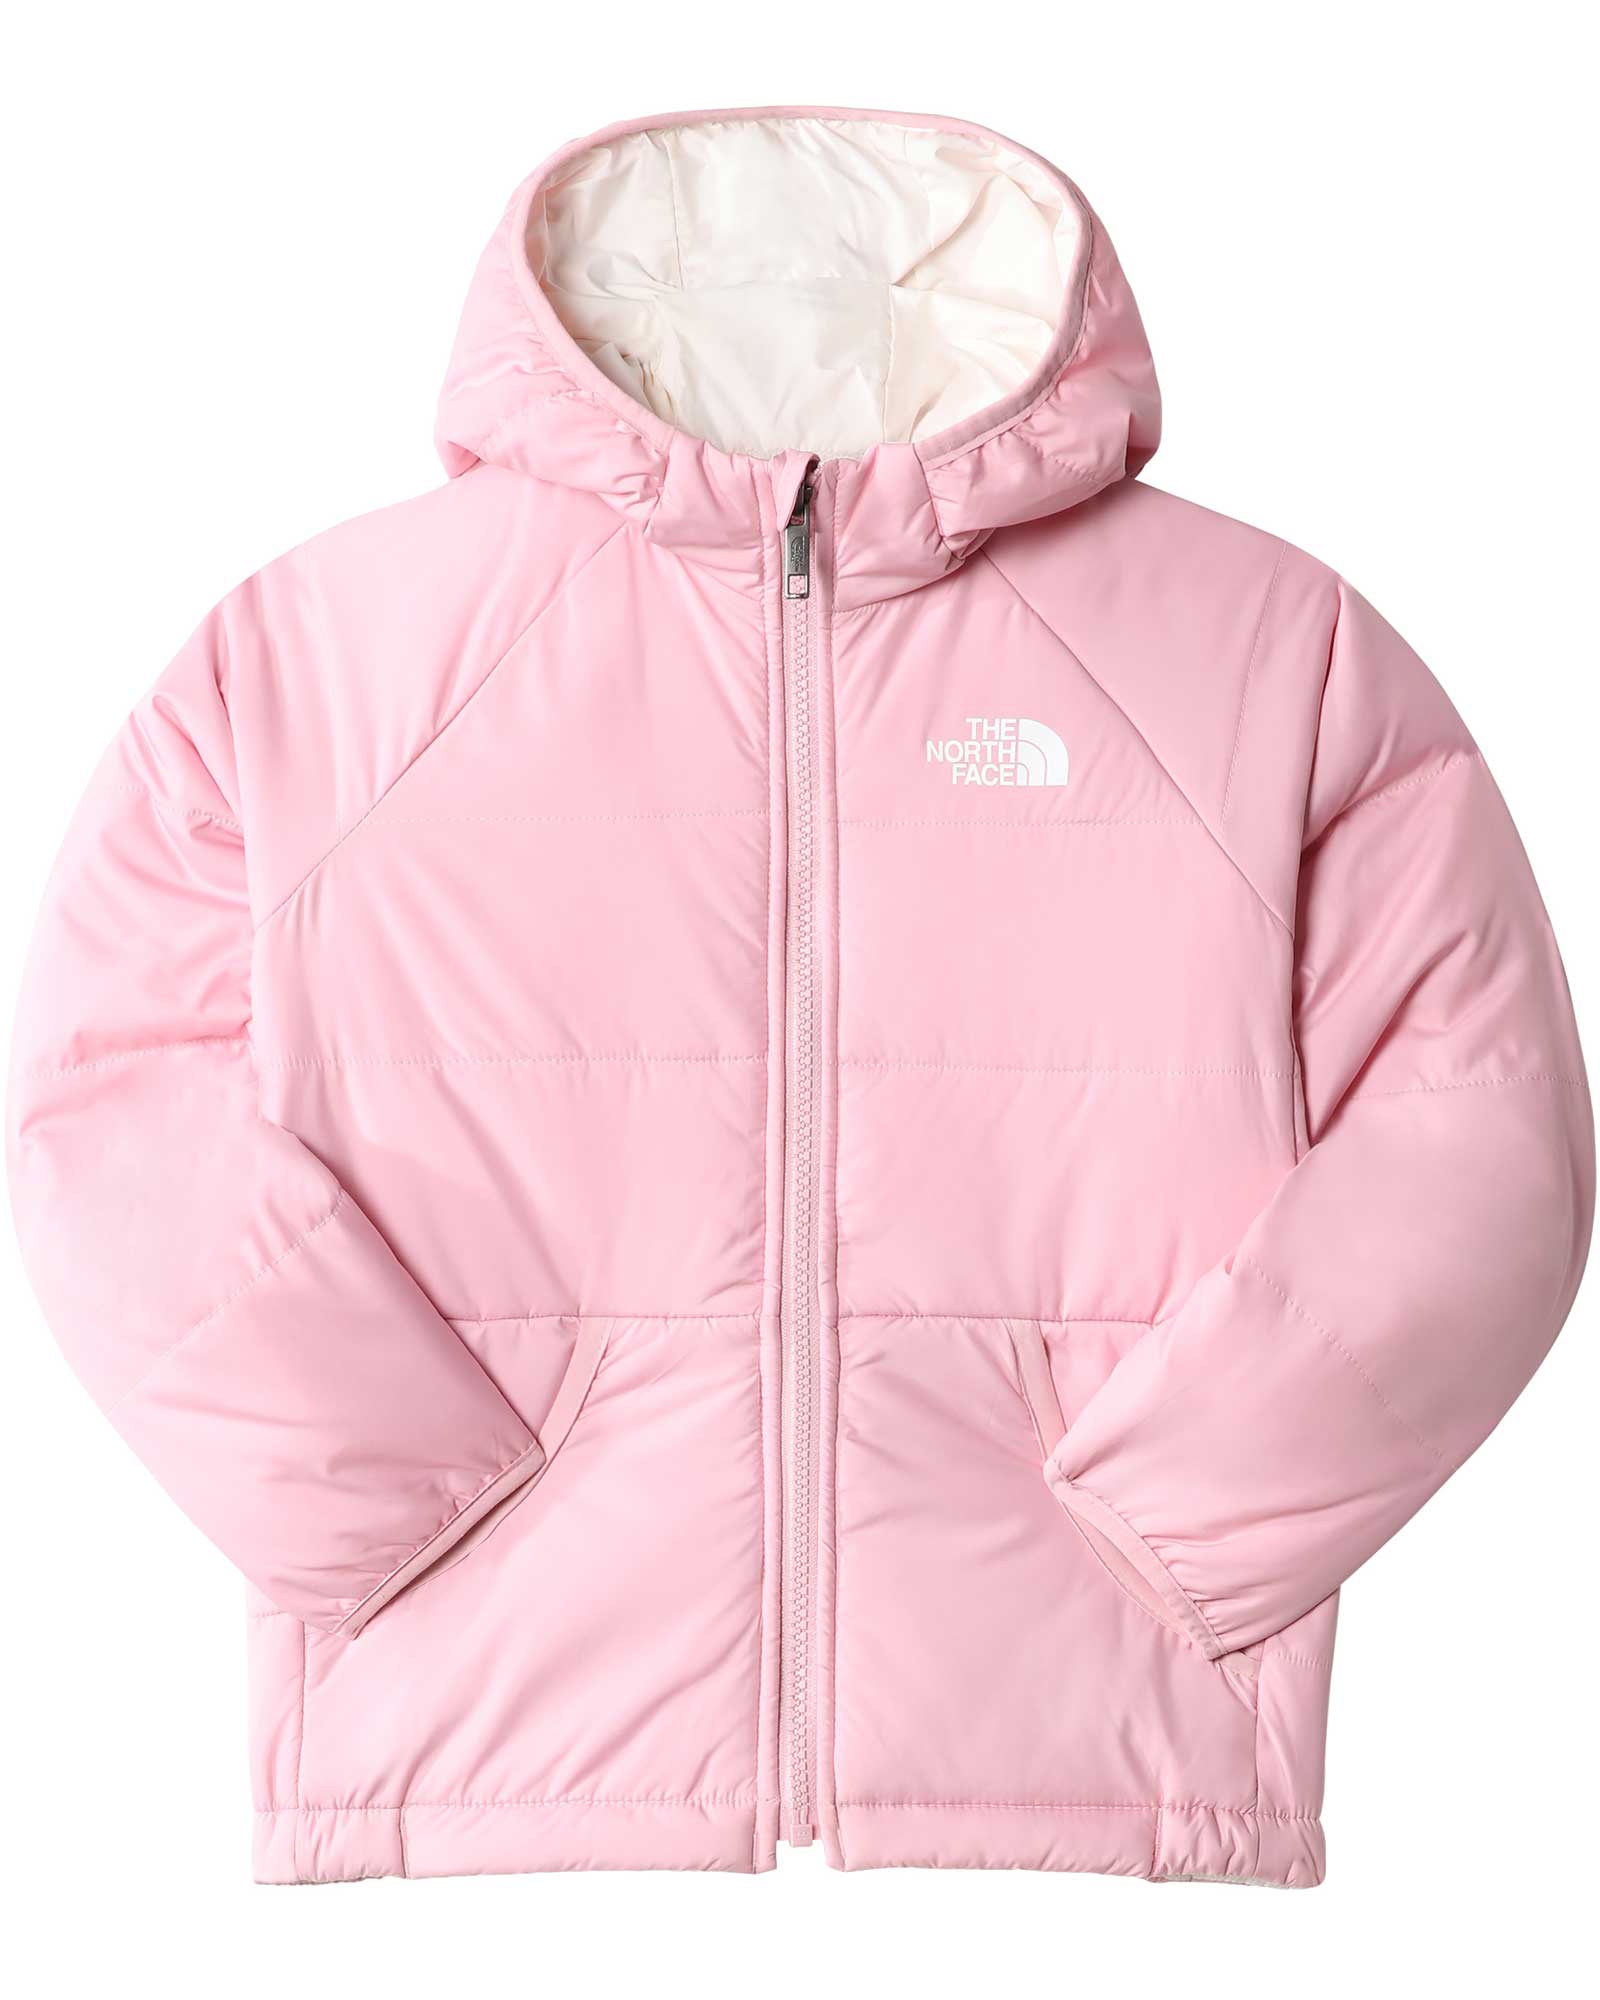 The North Face Reversible Perrito Kids Hooded Jacket